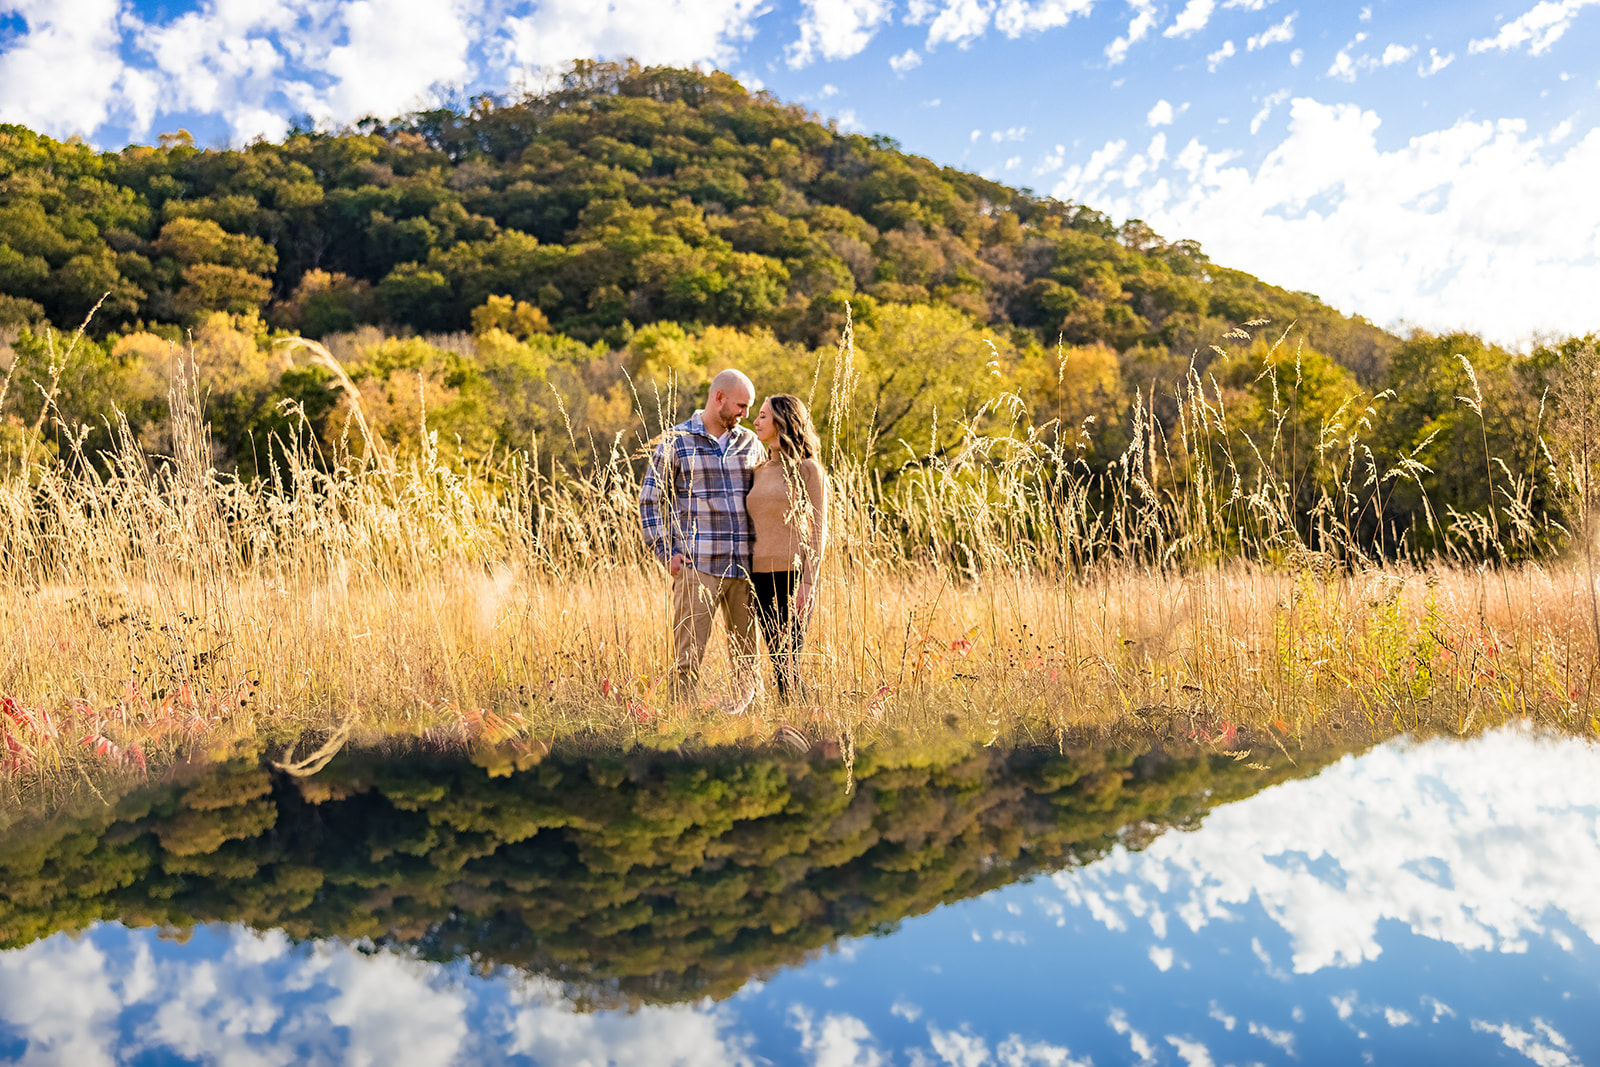 Lakeside Serenade: Perrot State Park Engagement Photos by Jeff Wiswell